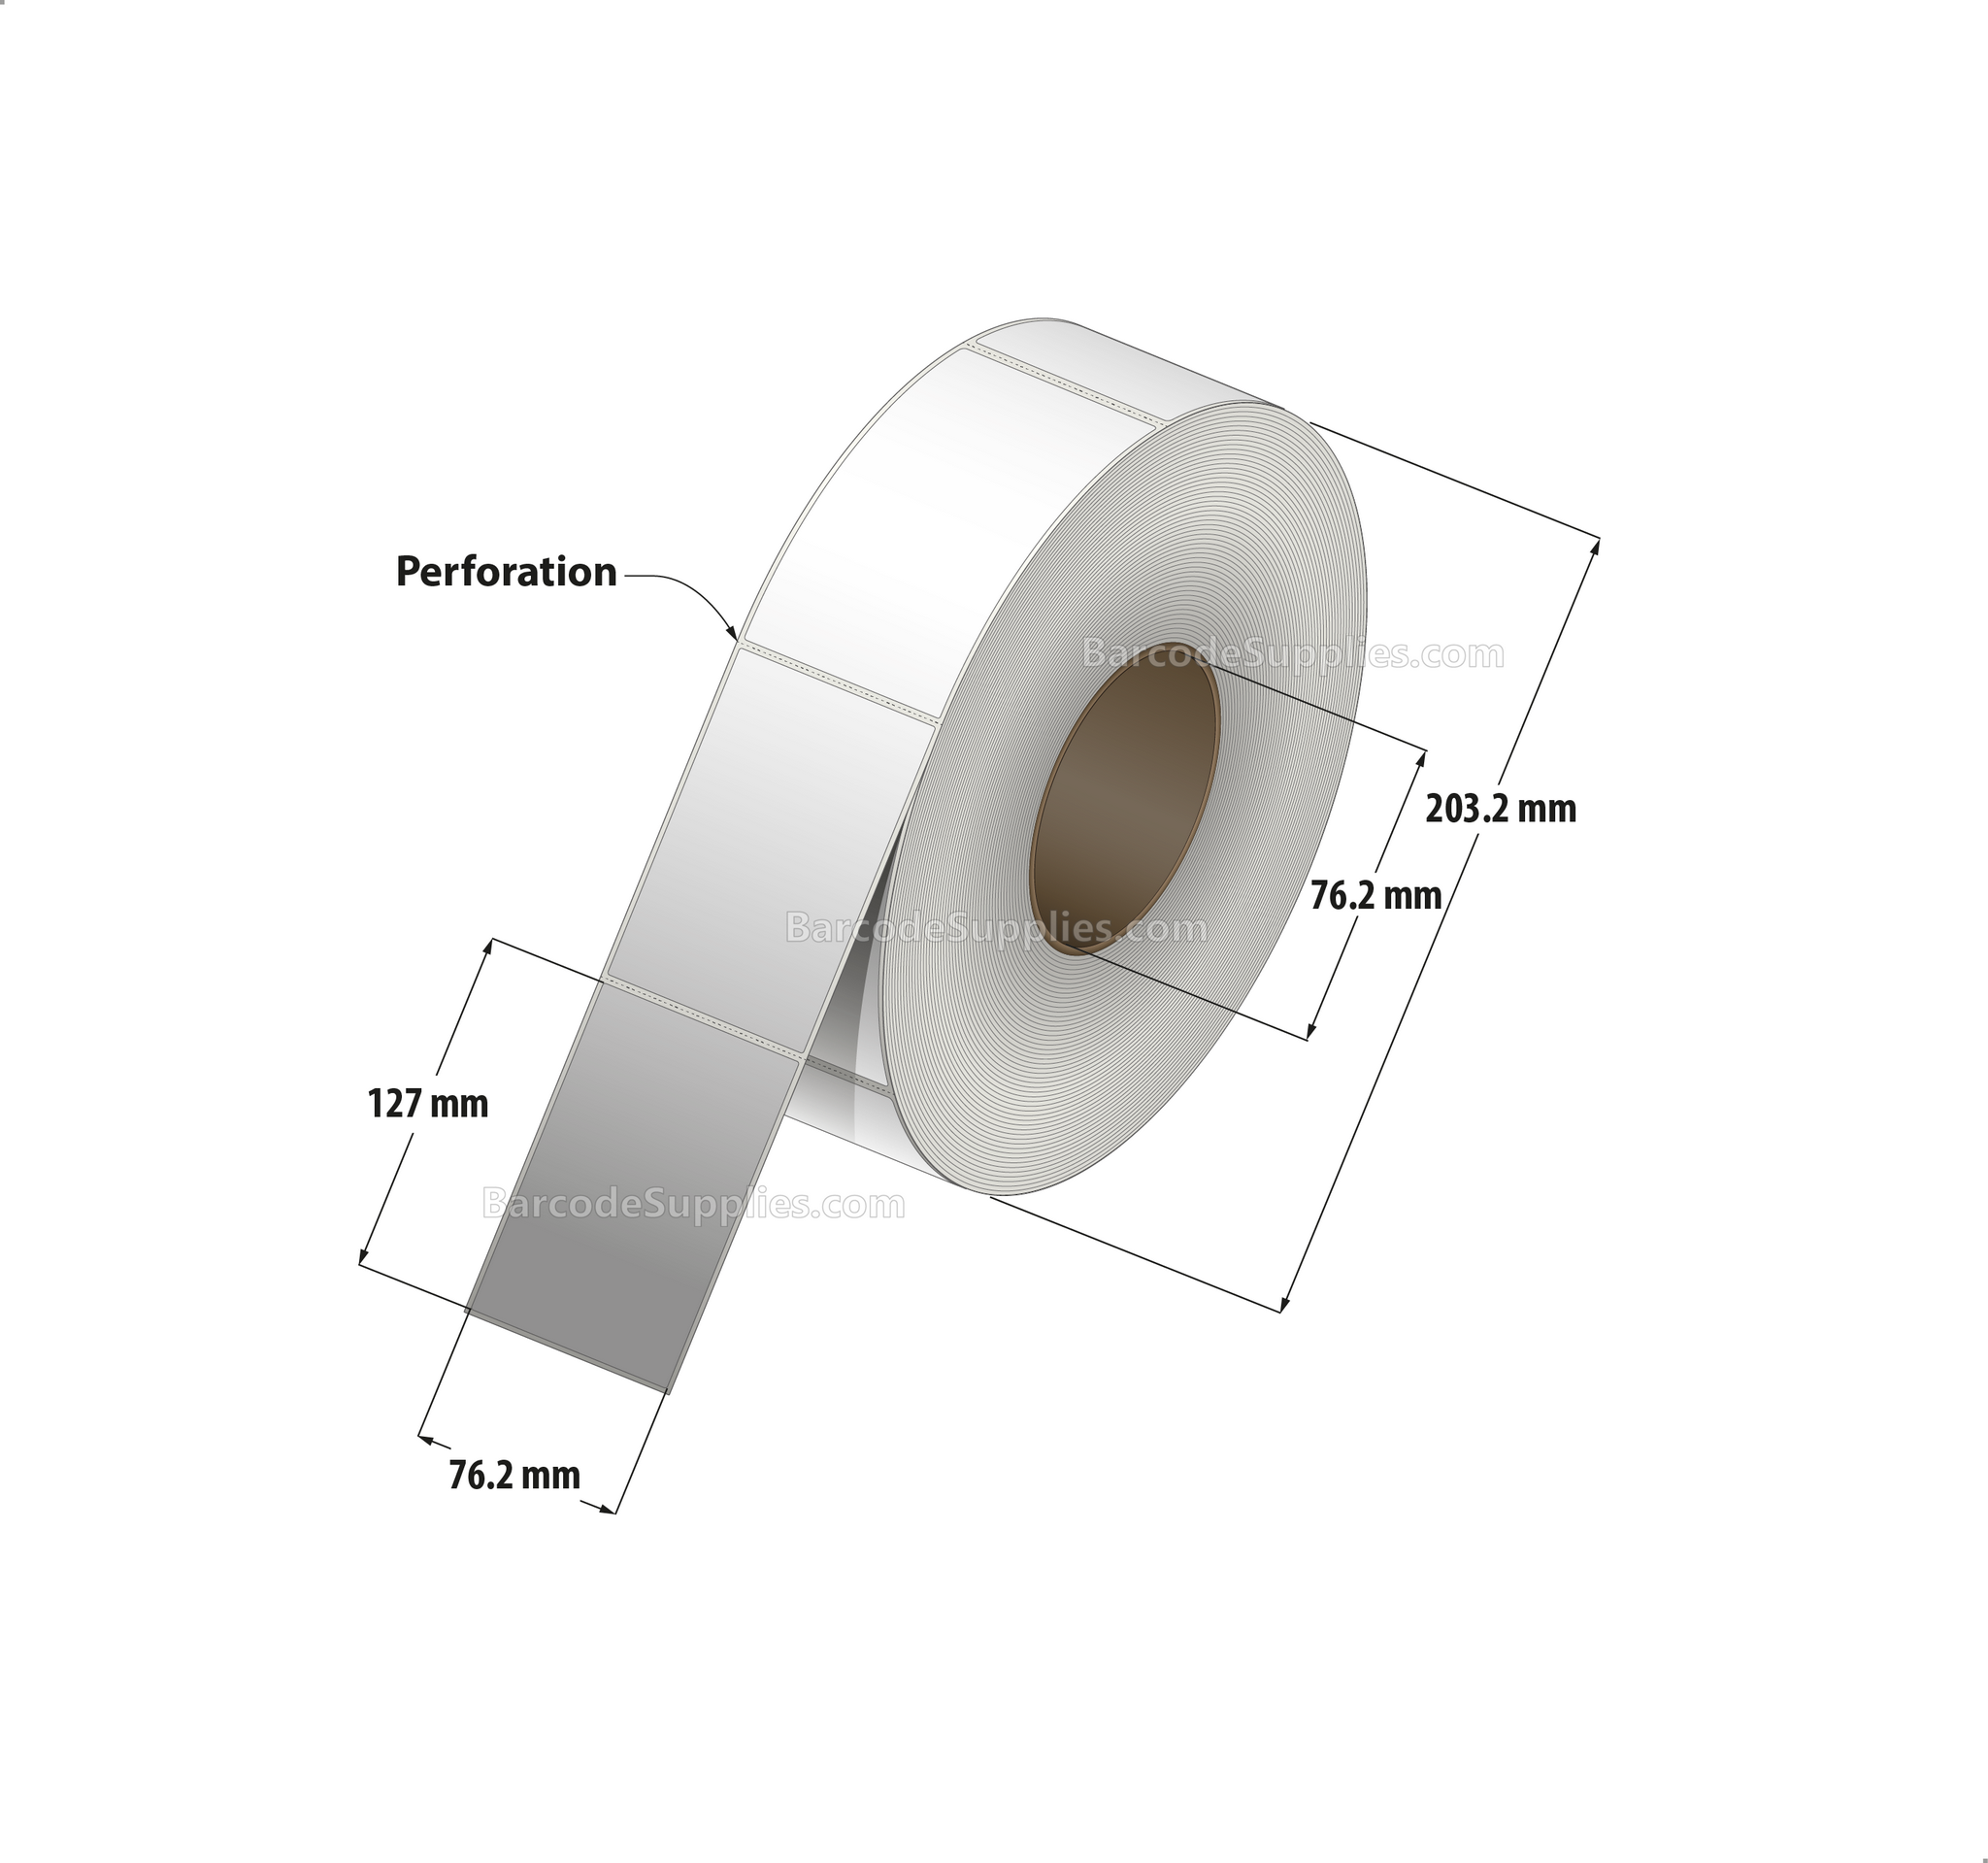 Products 3 x 5 Thermal Transfer White Labels With Permanent Adhesive - Perforated - 1200 Labels Per Roll - Carton Of 8 Rolls - 9600 Labels Total - MPN: RT-3-5-1200-3